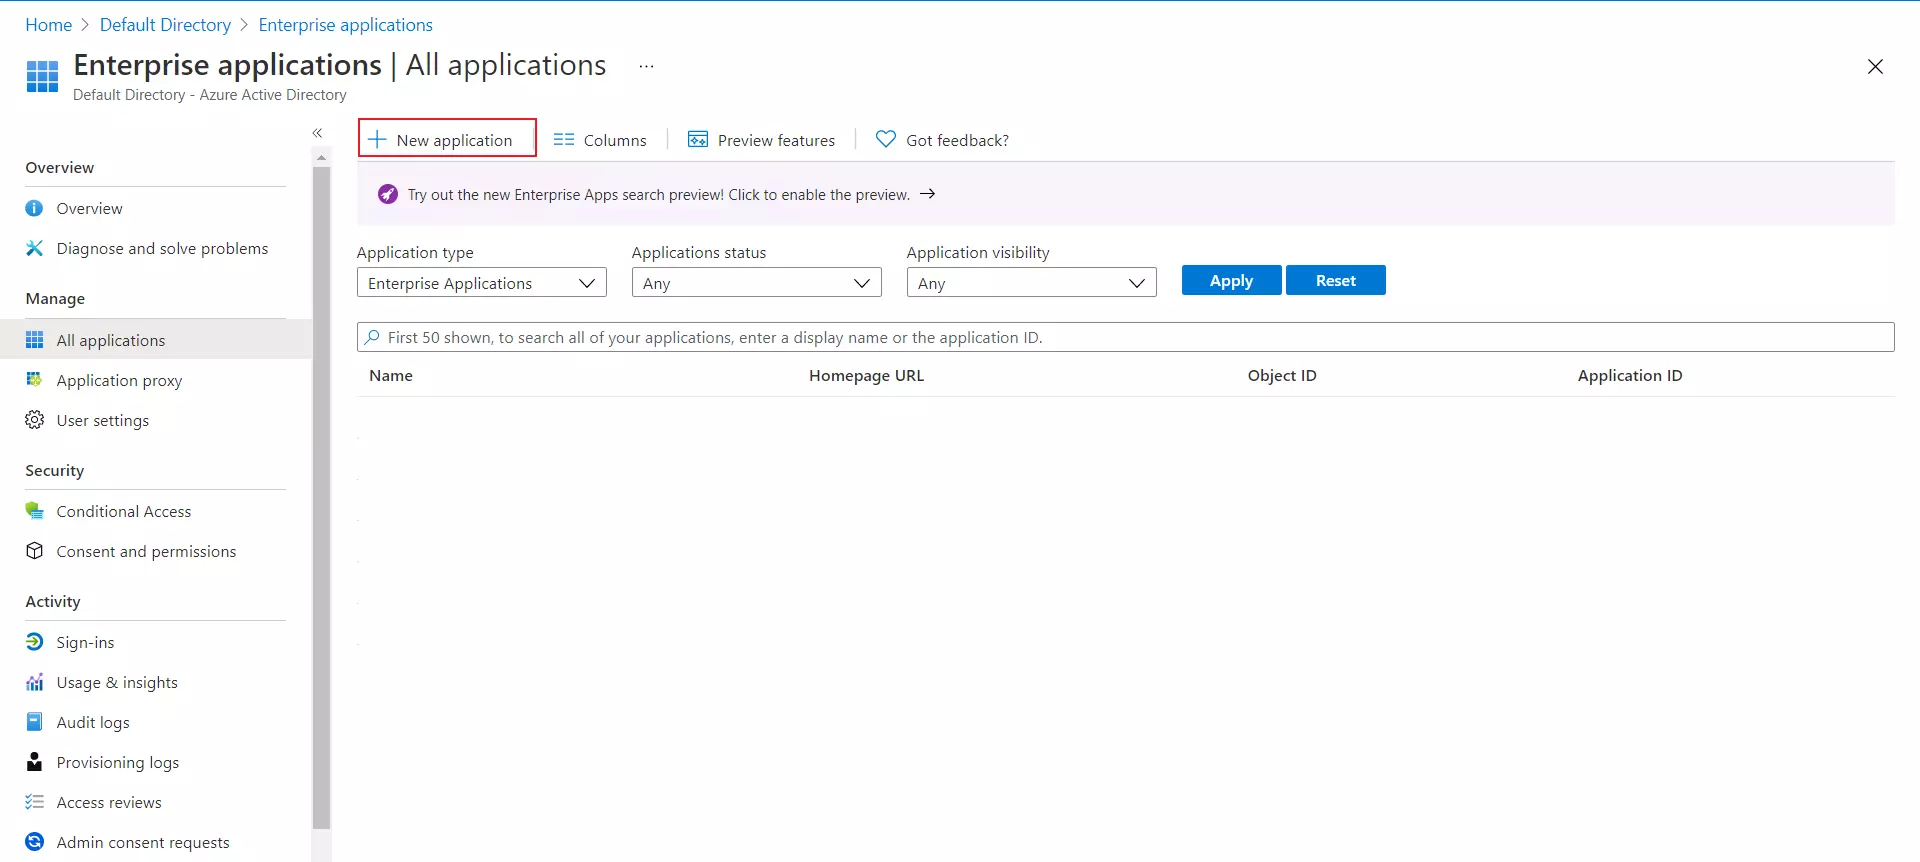 Azure AD as IDP : Adding New Application